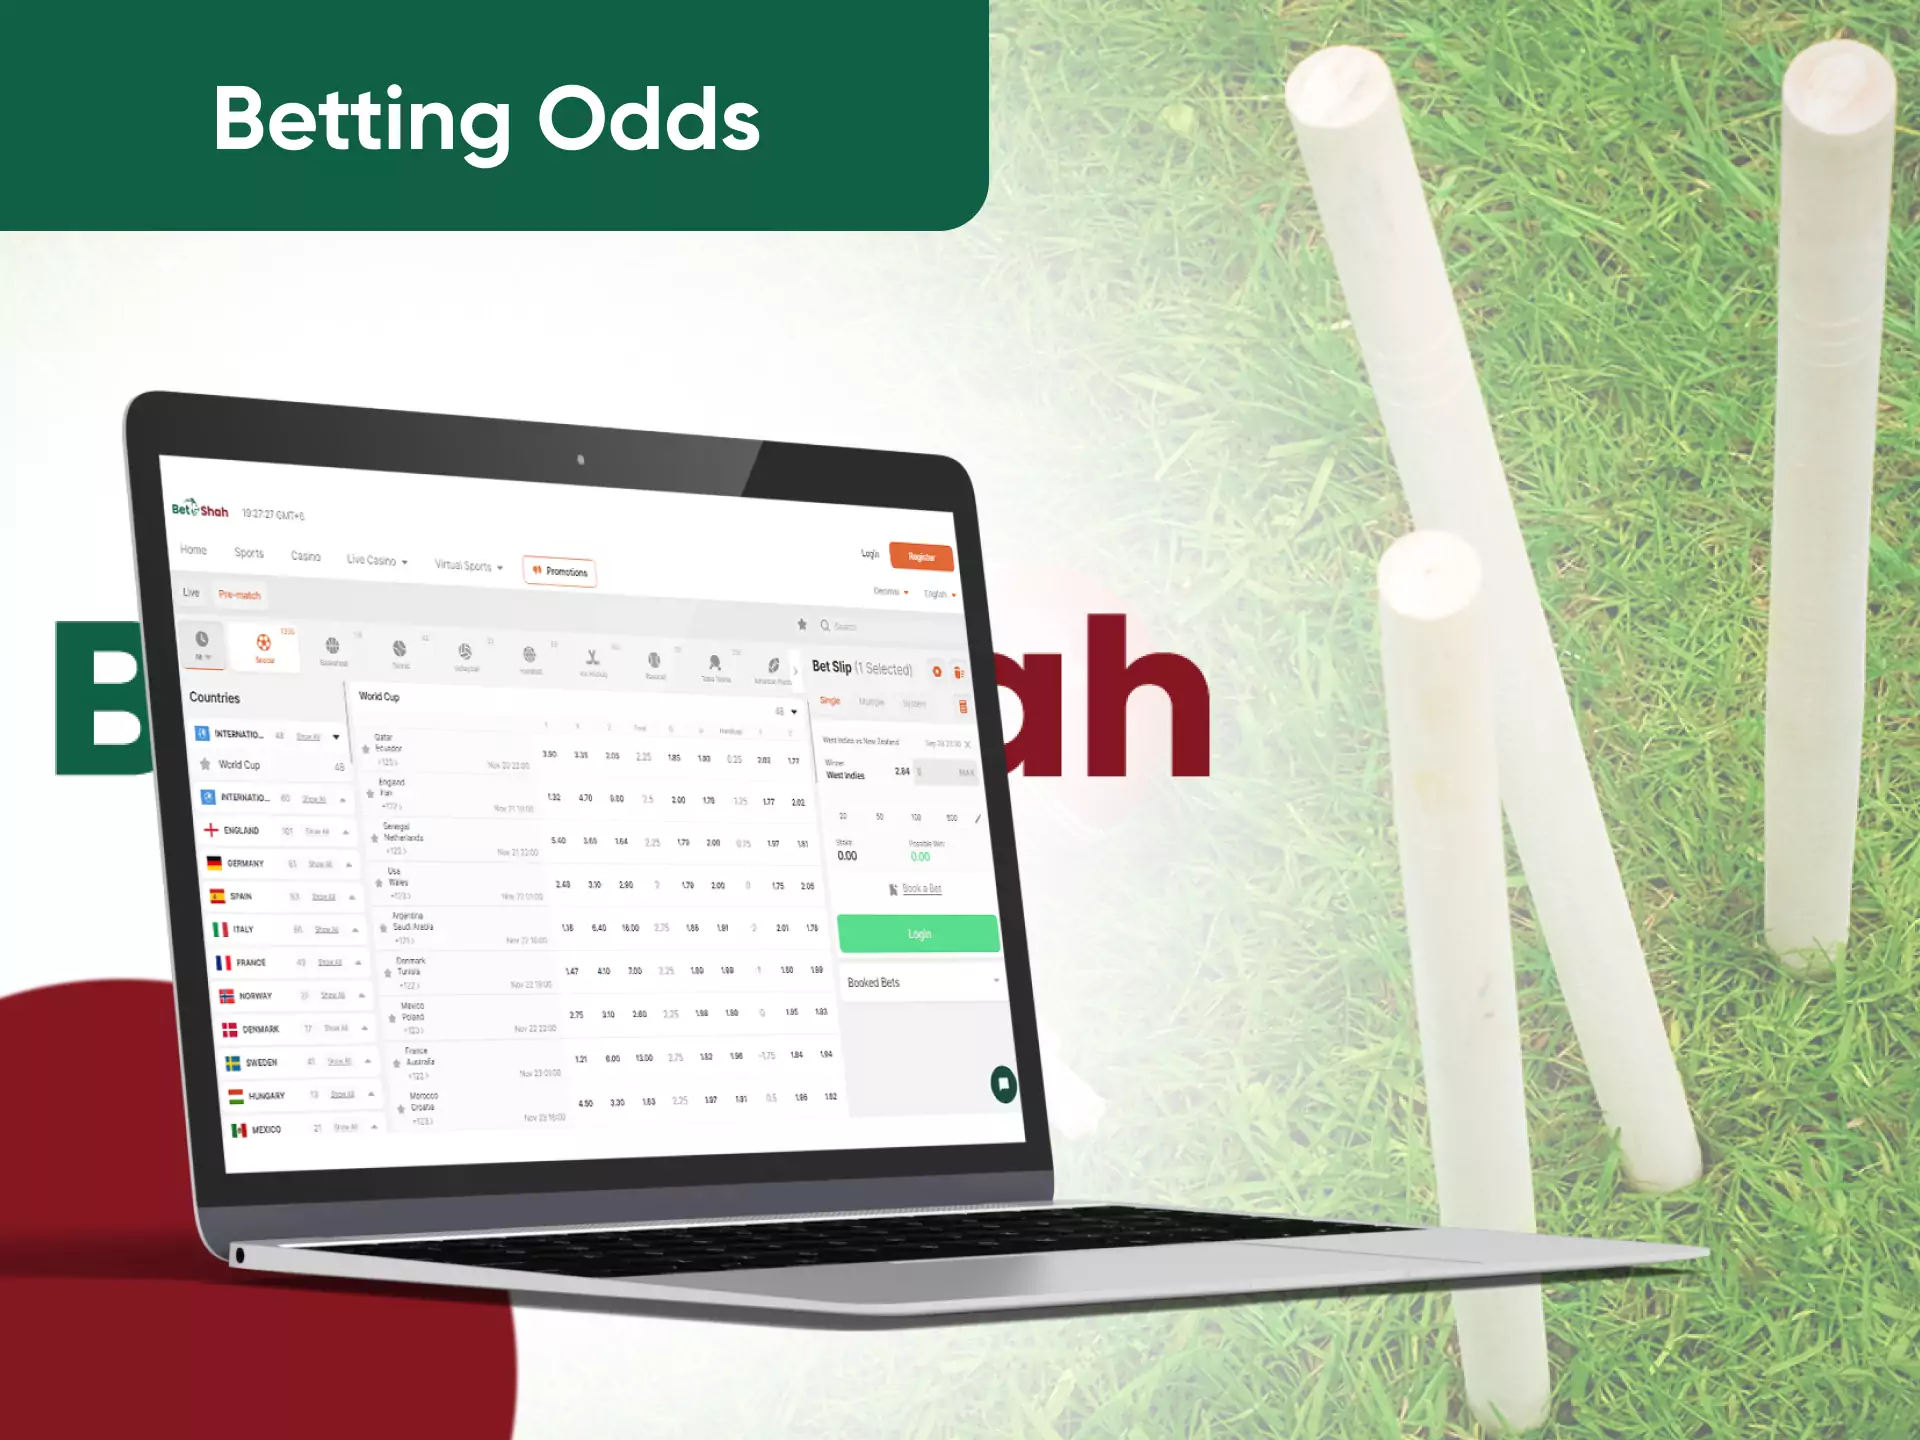 Betshah provides profitable odds in its sportsbook.